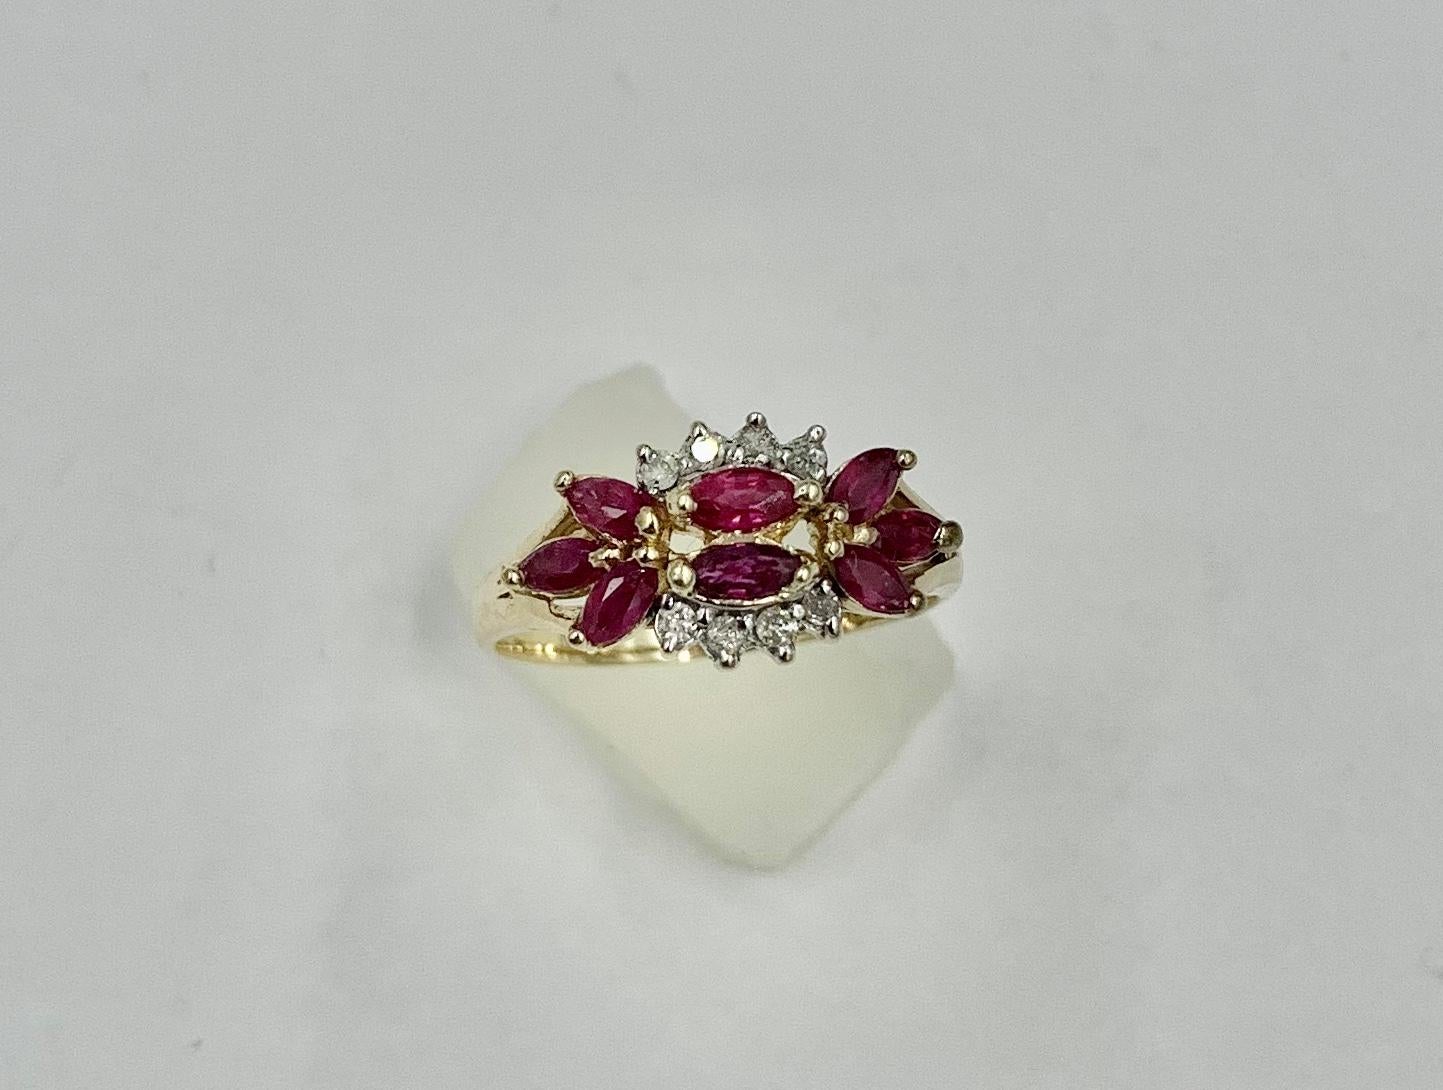 A classic Marquise Ruby and Diamond Wedding Engagement Stack Ring.  The eight vivid red Rubies are Marquise Cut.  On either side of the central rubies are a row of sparkling white Diamonds.  The Rubies and Diamonds are set in 14 Karat Yellow Gold -